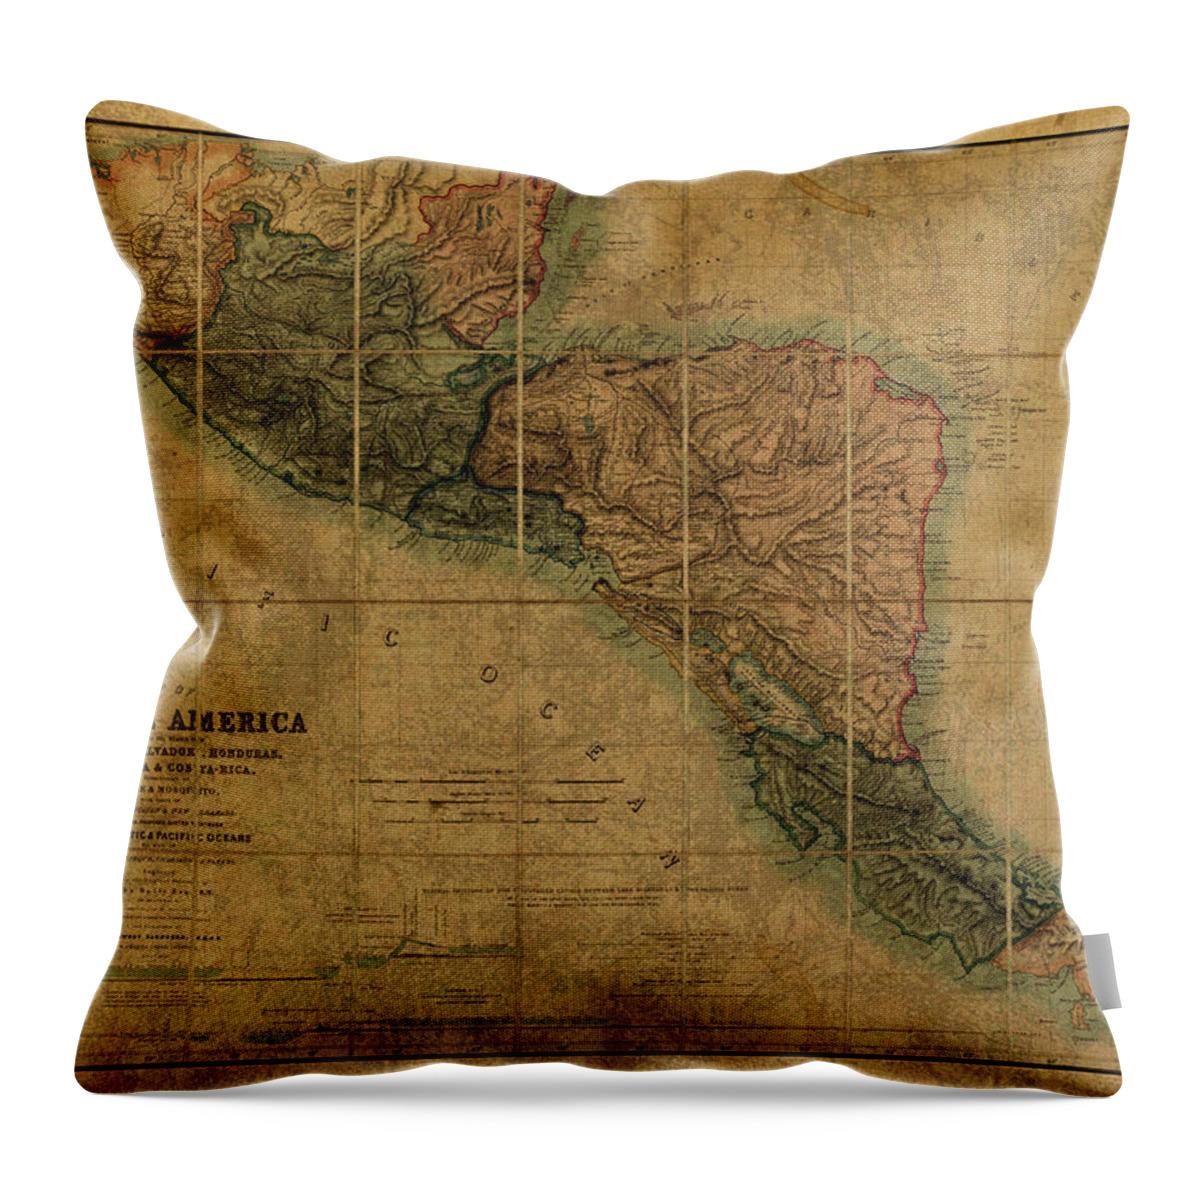 Vintage Throw Pillow featuring the mixed media Vintage Map of Central America 1850 by Design Turnpike